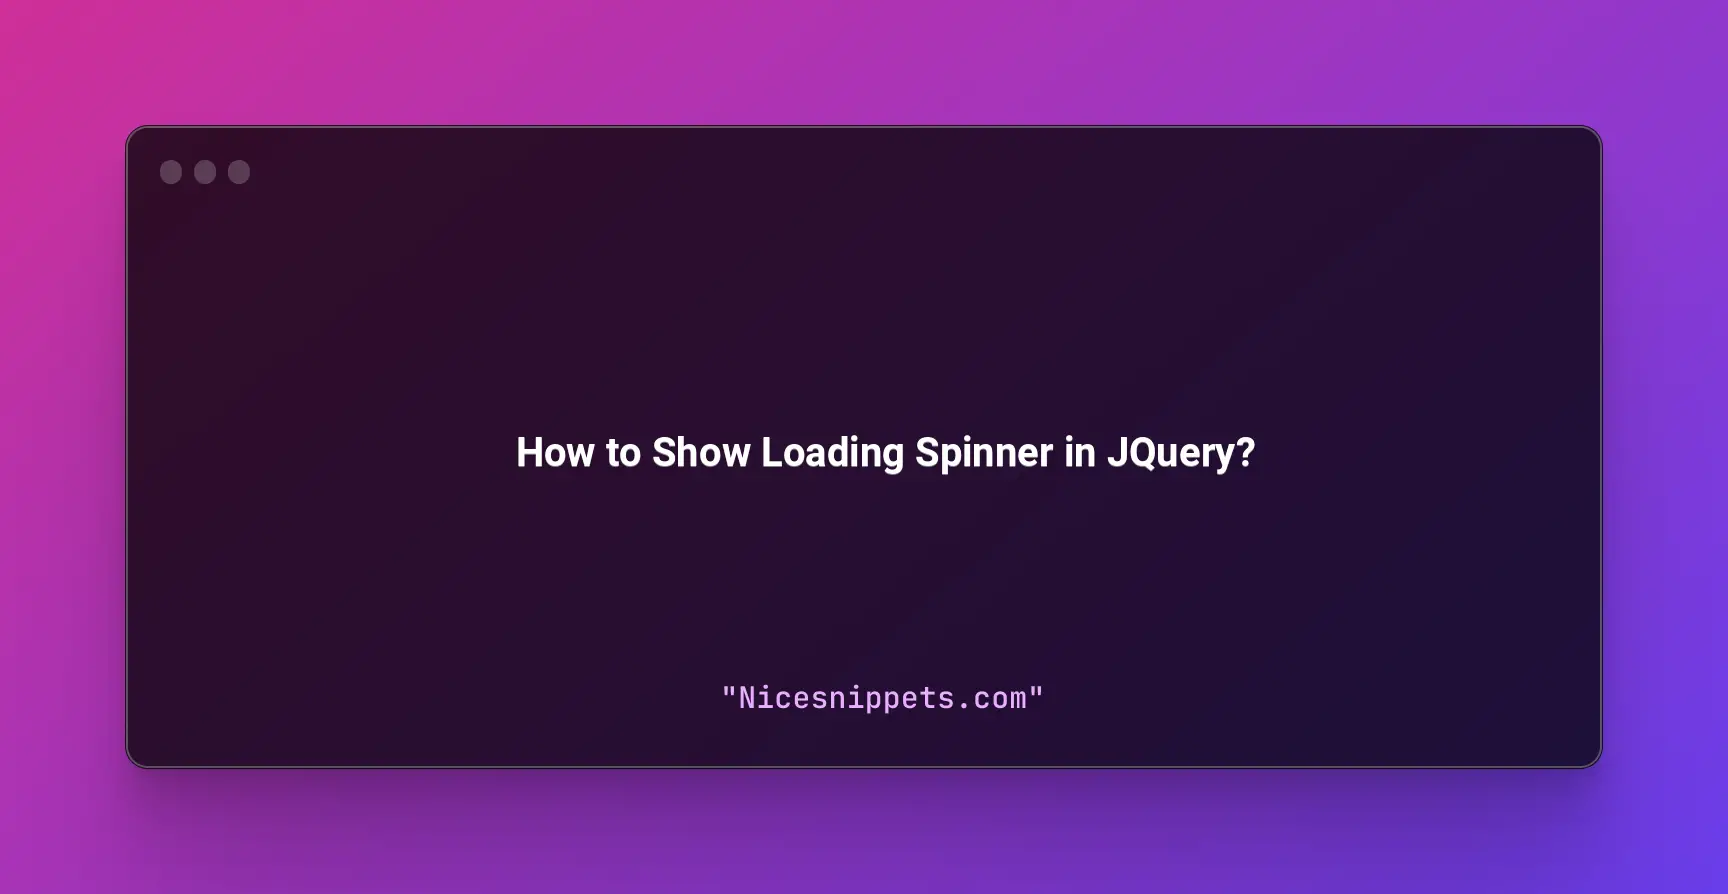 How to Show Loading Spinner in JQuery?